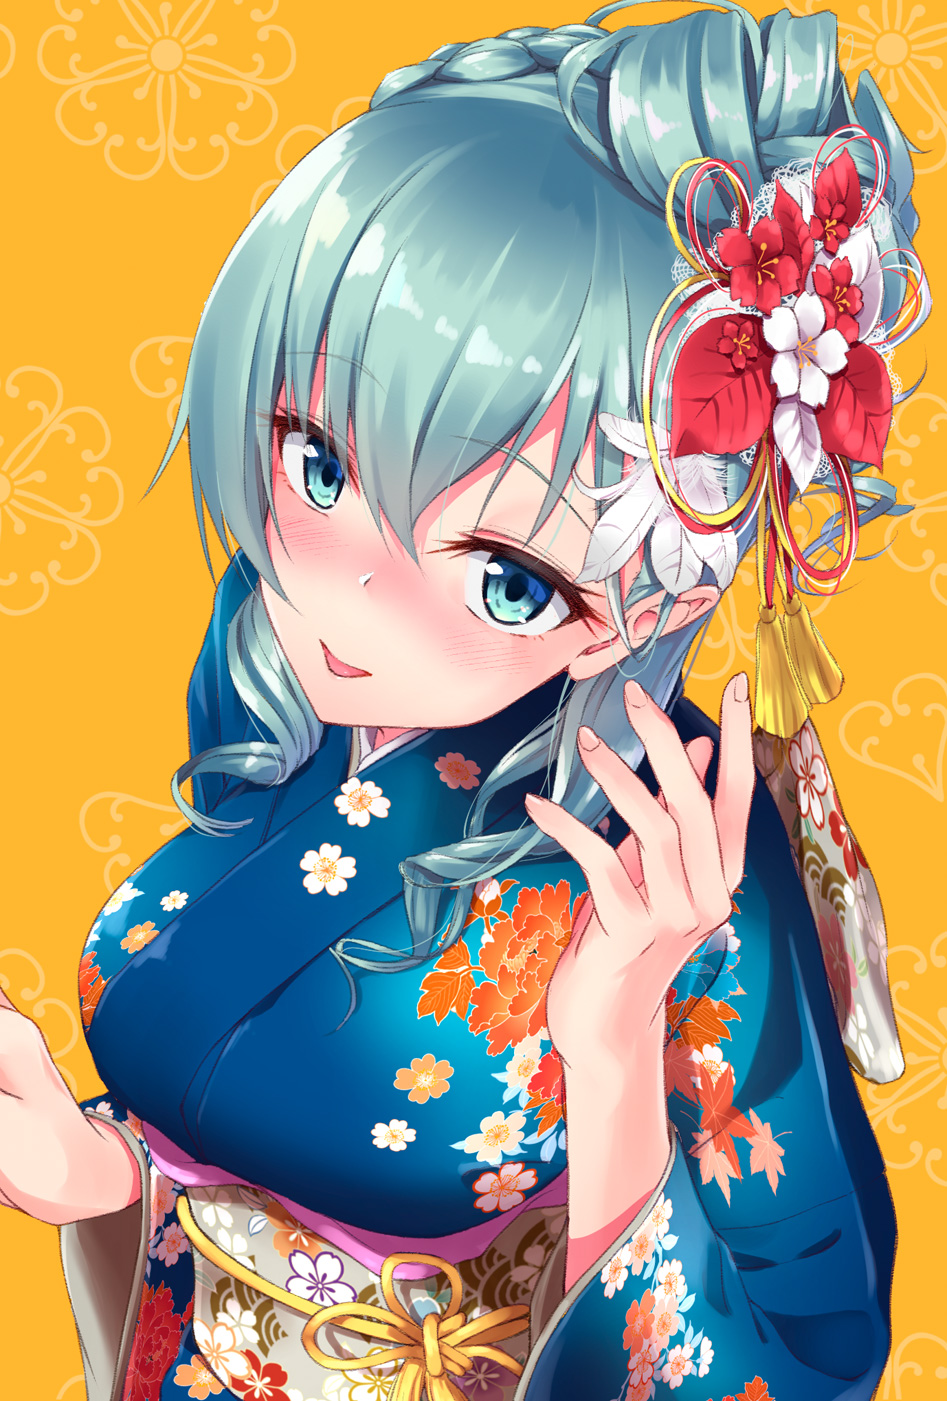 1girl :p alternate_hairstyle aqua_eyes aqua_hair awa_yume blue_kimono blush braid breasts curly_hair eyebrows_visible_through_hair eyelashes feathers fingernails floral_background floral_print flower from_above hair_between_eyes hair_feathers hair_flower hair_ornament hair_up highres japanese_clothes kantai_collection kanzashi kimono lace large_breasts long_hair long_sleeves looking_at_viewer obi orange_background poinsettia red_flower sash seigaiha shiny shiny_hair smile solo suzuya_(kantai_collection) tassel tongue tongue_out updo upper_body wide_sleeves